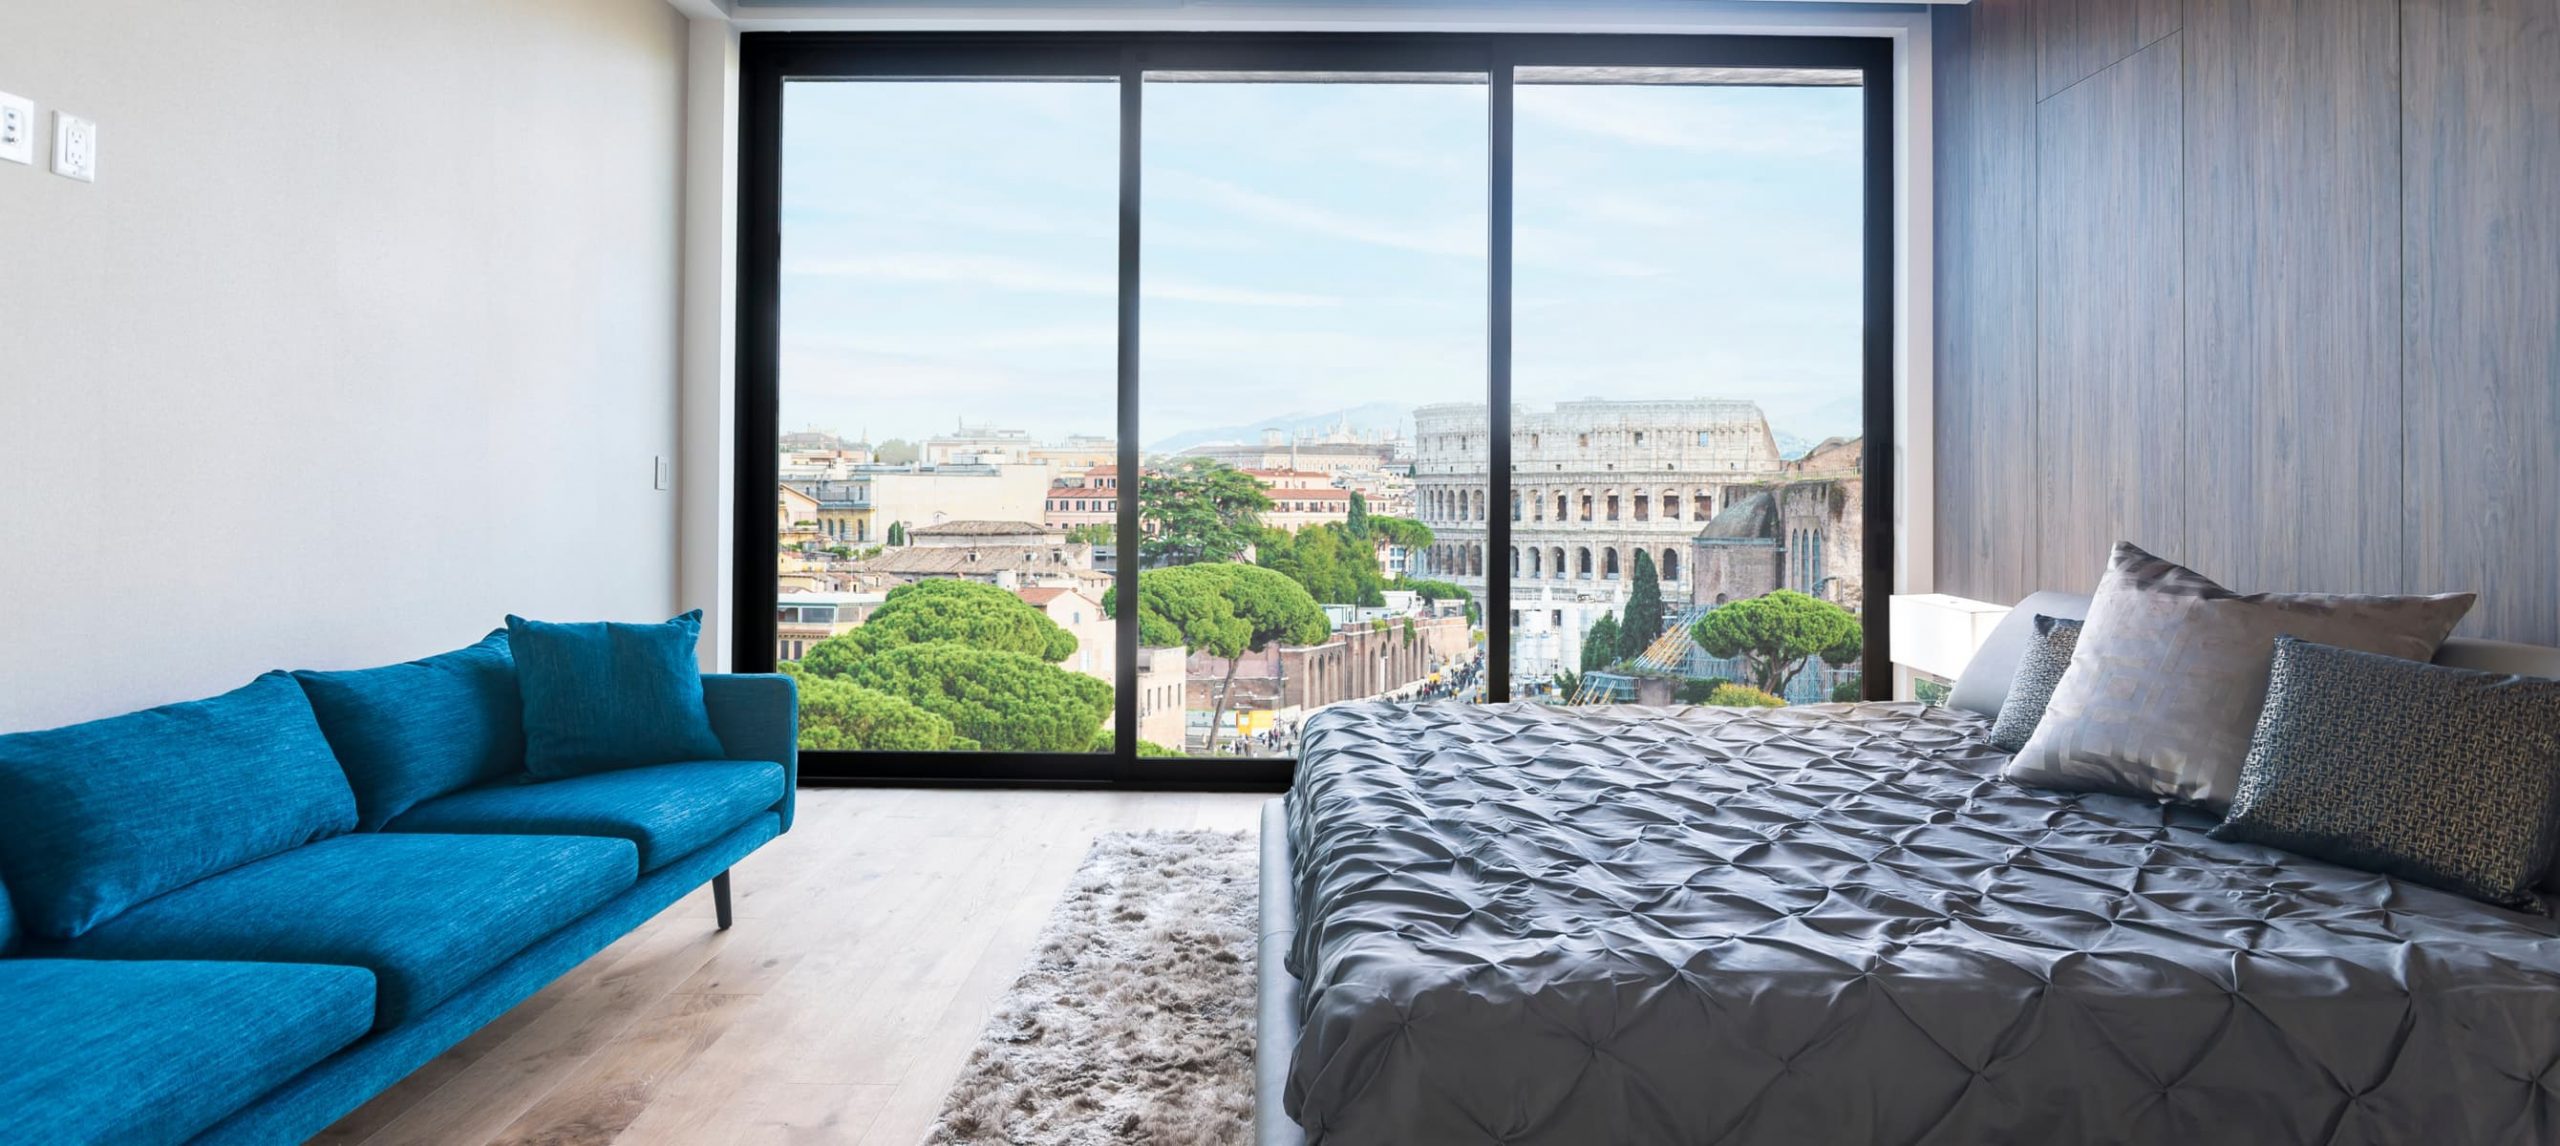 The Top 5 Hotels Near The Colosseum, Rome